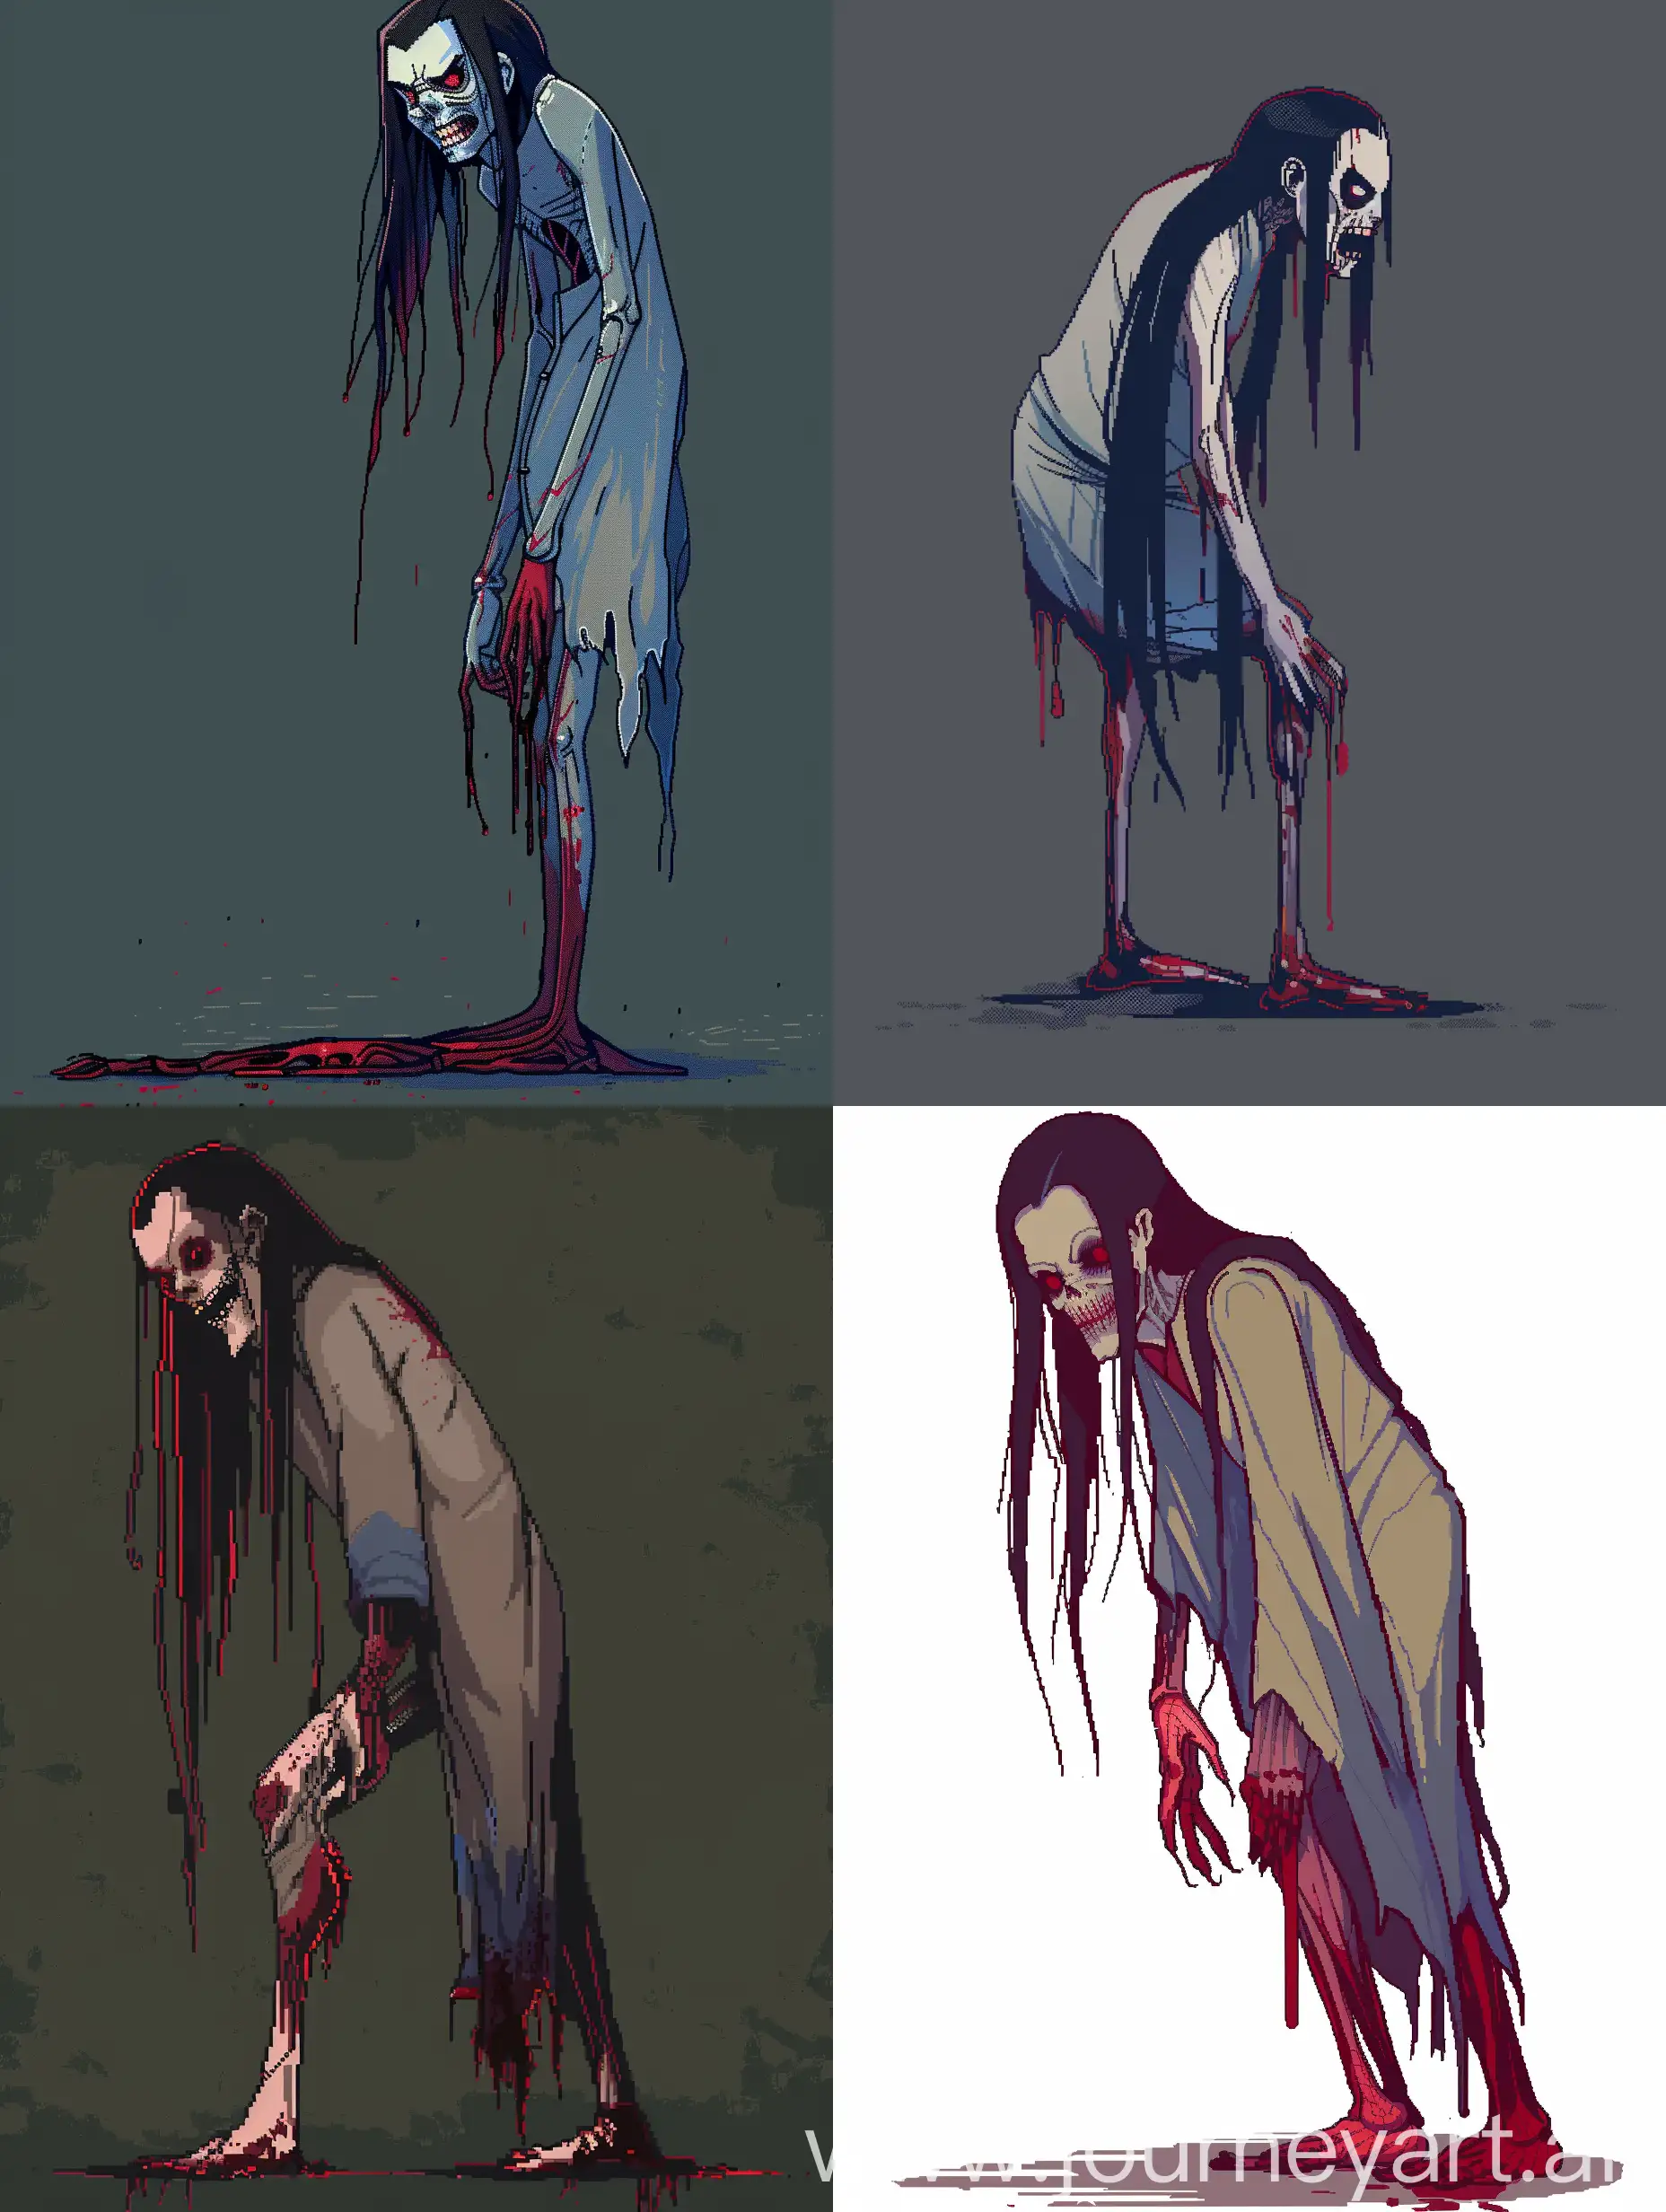 Pixel. scary look, evil smile, stooped posture with a hump, pixel art, bloody legs. side view, full length. pixel art

